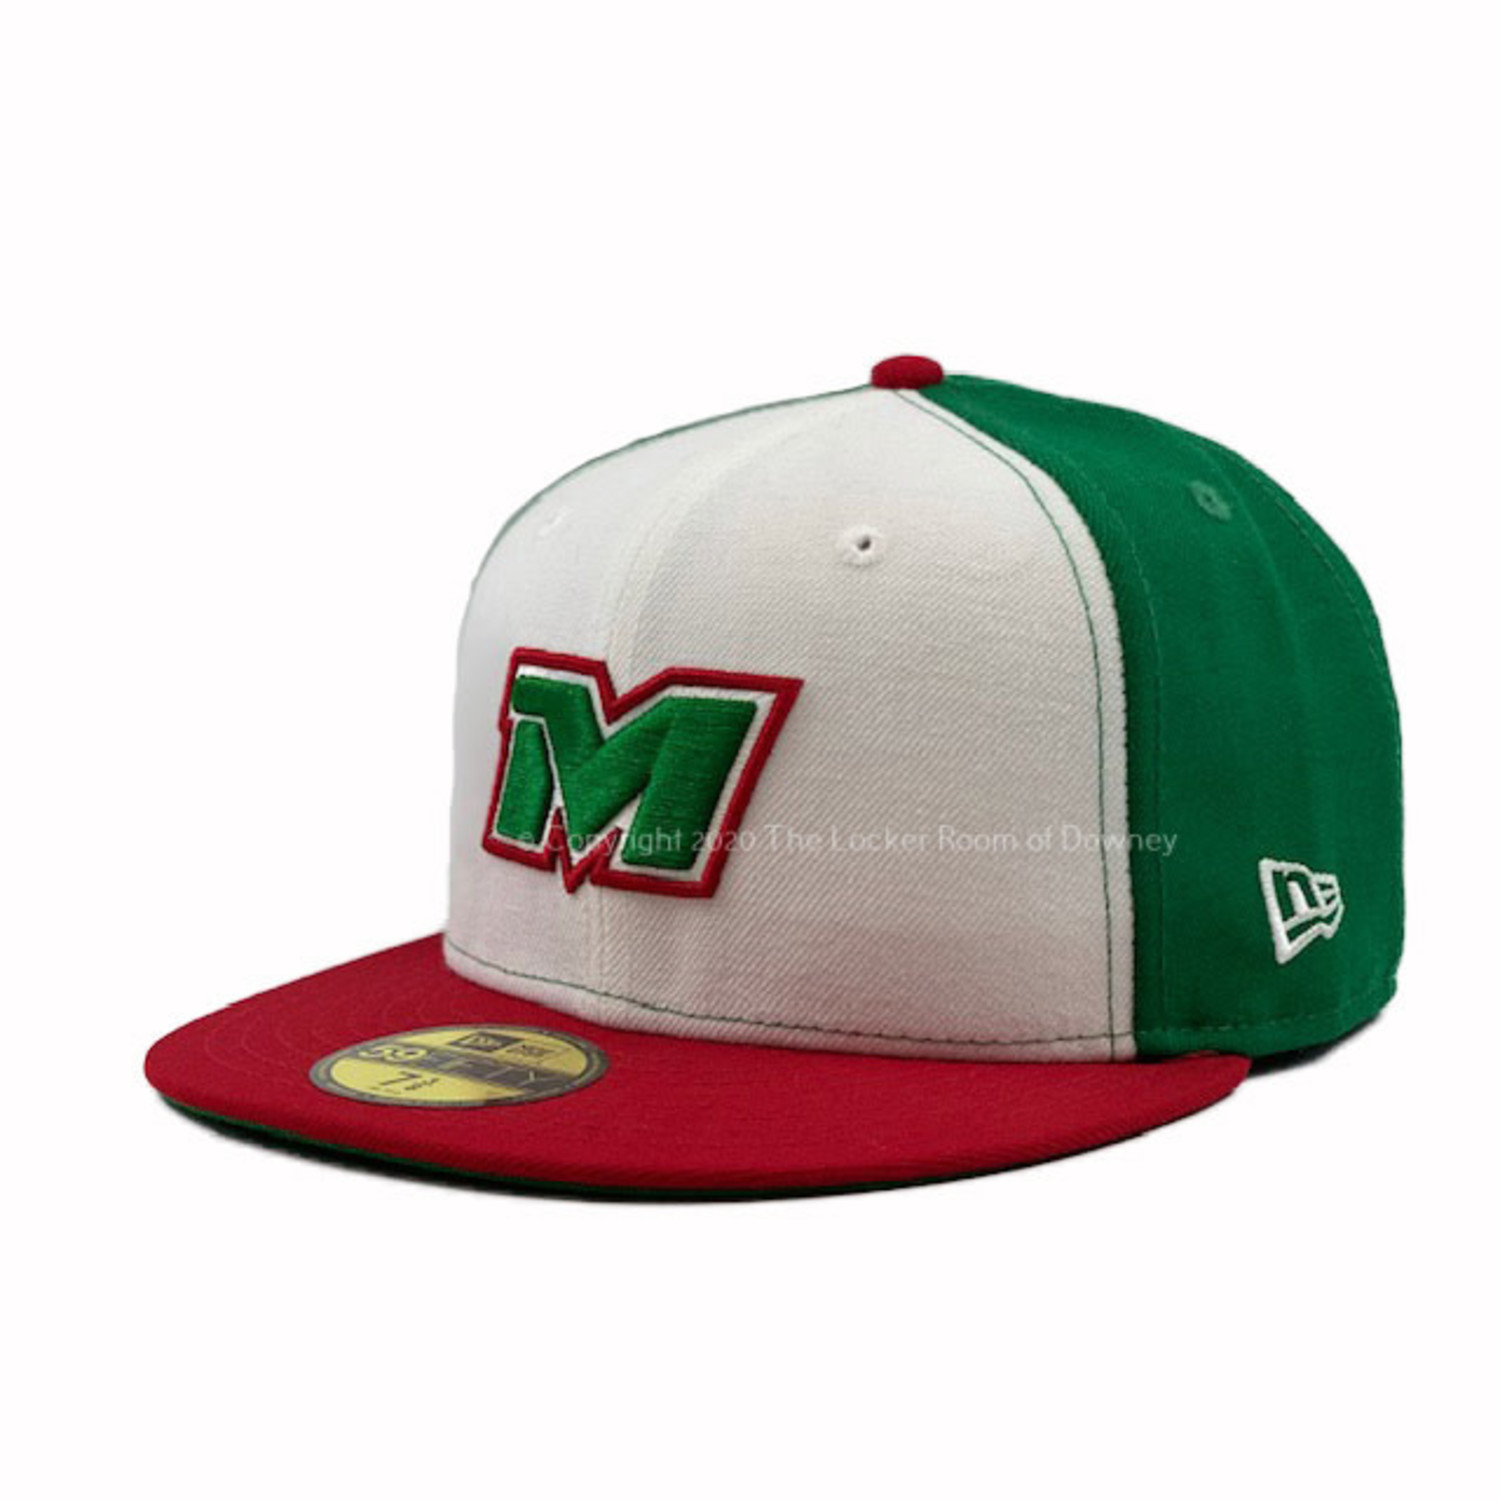 Mex 3 Colors Serie Del Caribe The Locker Room of Downey